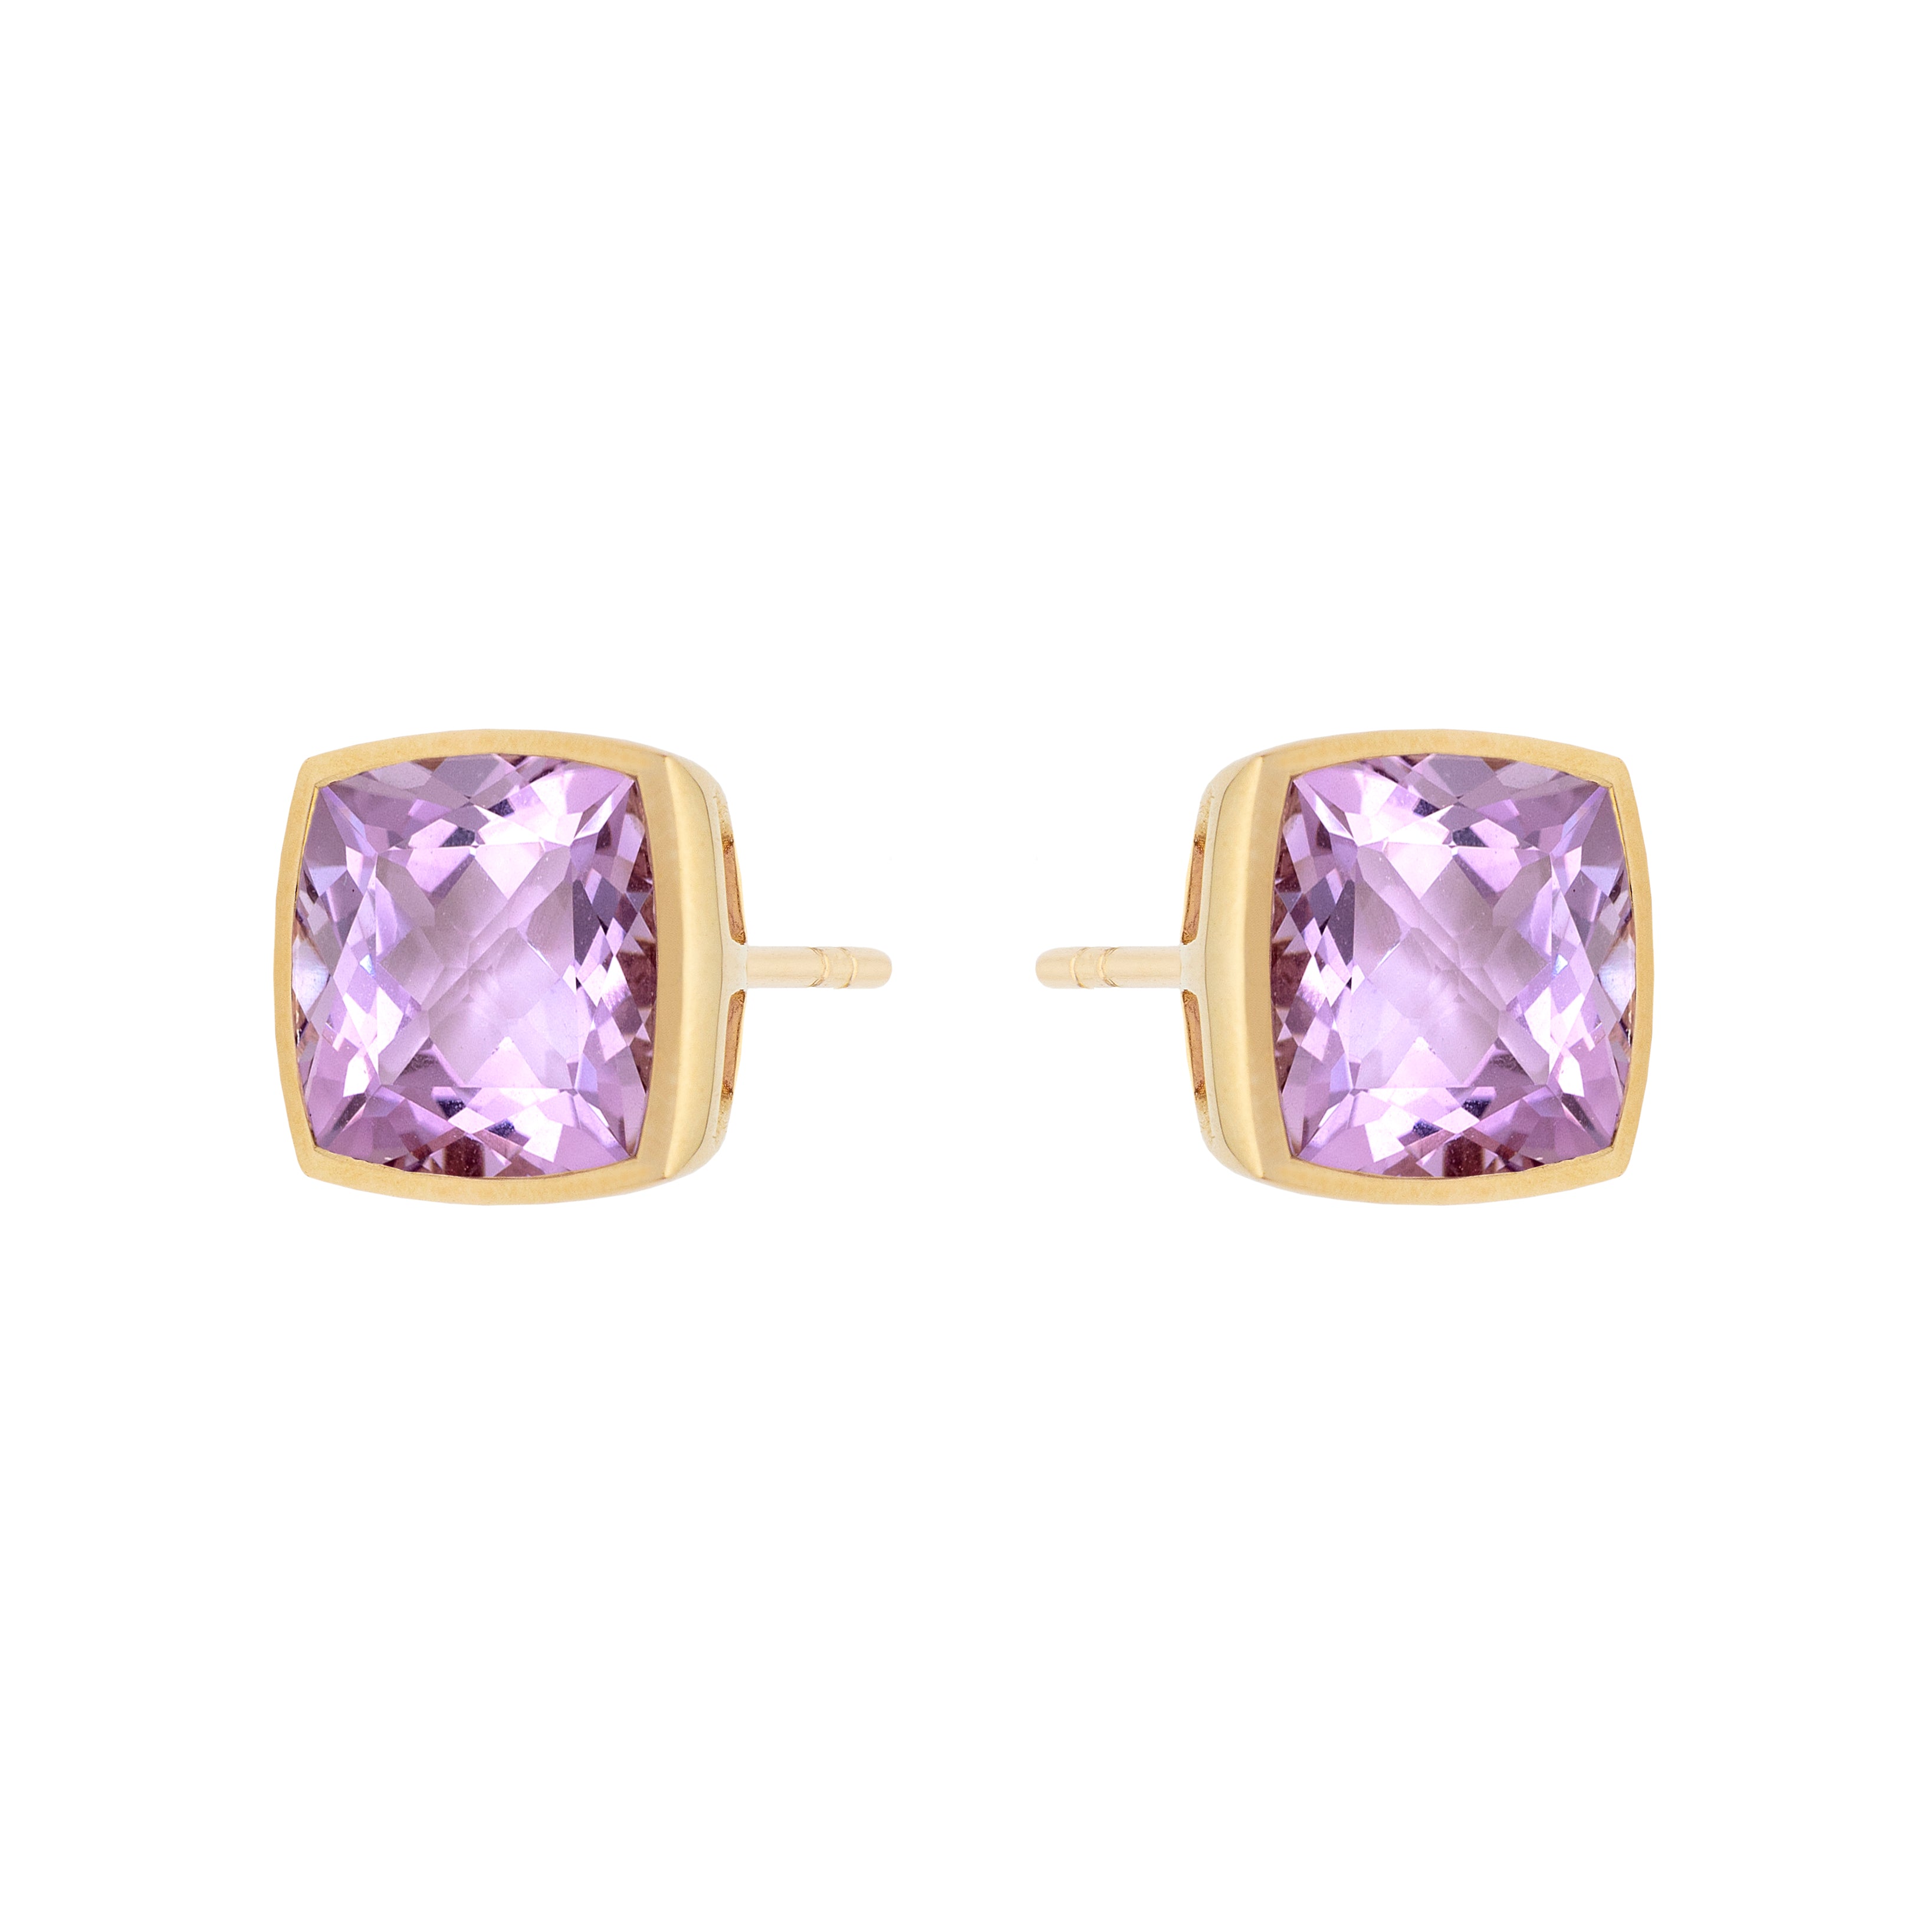 9ct Yellow Gold Rub-Over Set Cushion Pink Amethyst Earrings